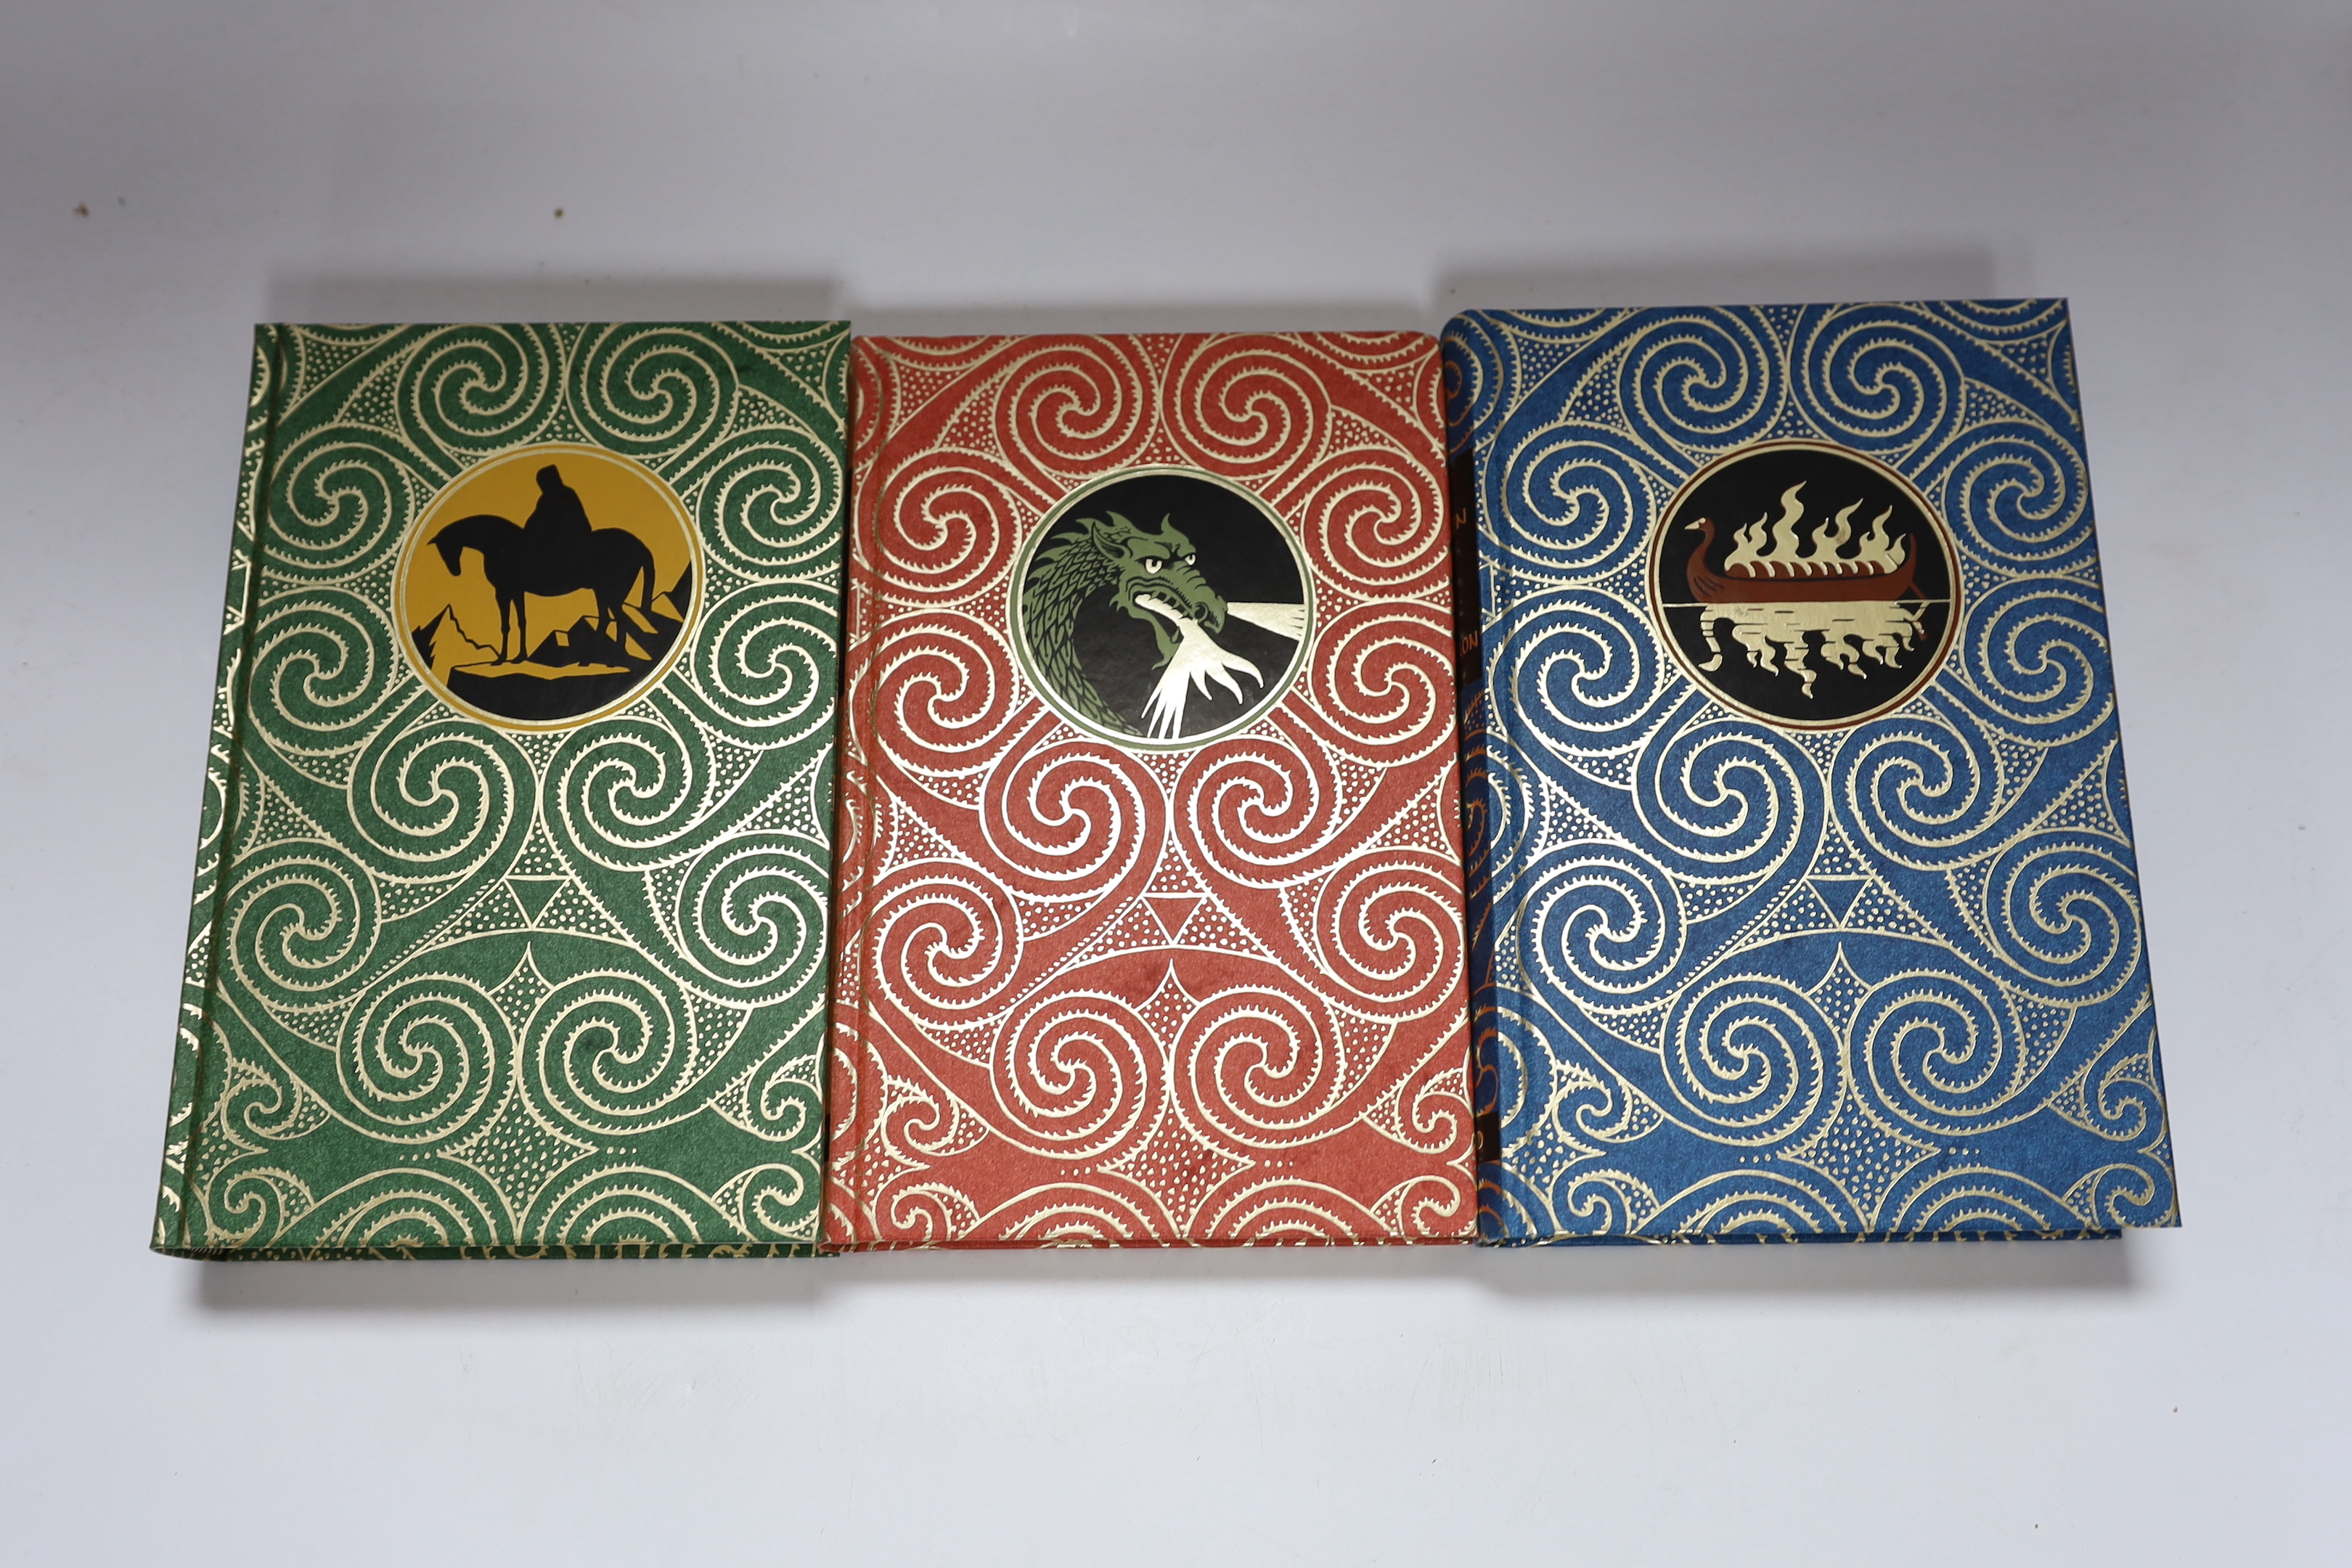 Folio Society - Tolkein's Lord of the Rings. 3 vols. illus (Grathmer & Fraser), decorated cloth and in the decorated box. 9th printing, 2002; together with (same author) The Hobbit. illus.; decorated cloth and slip case.